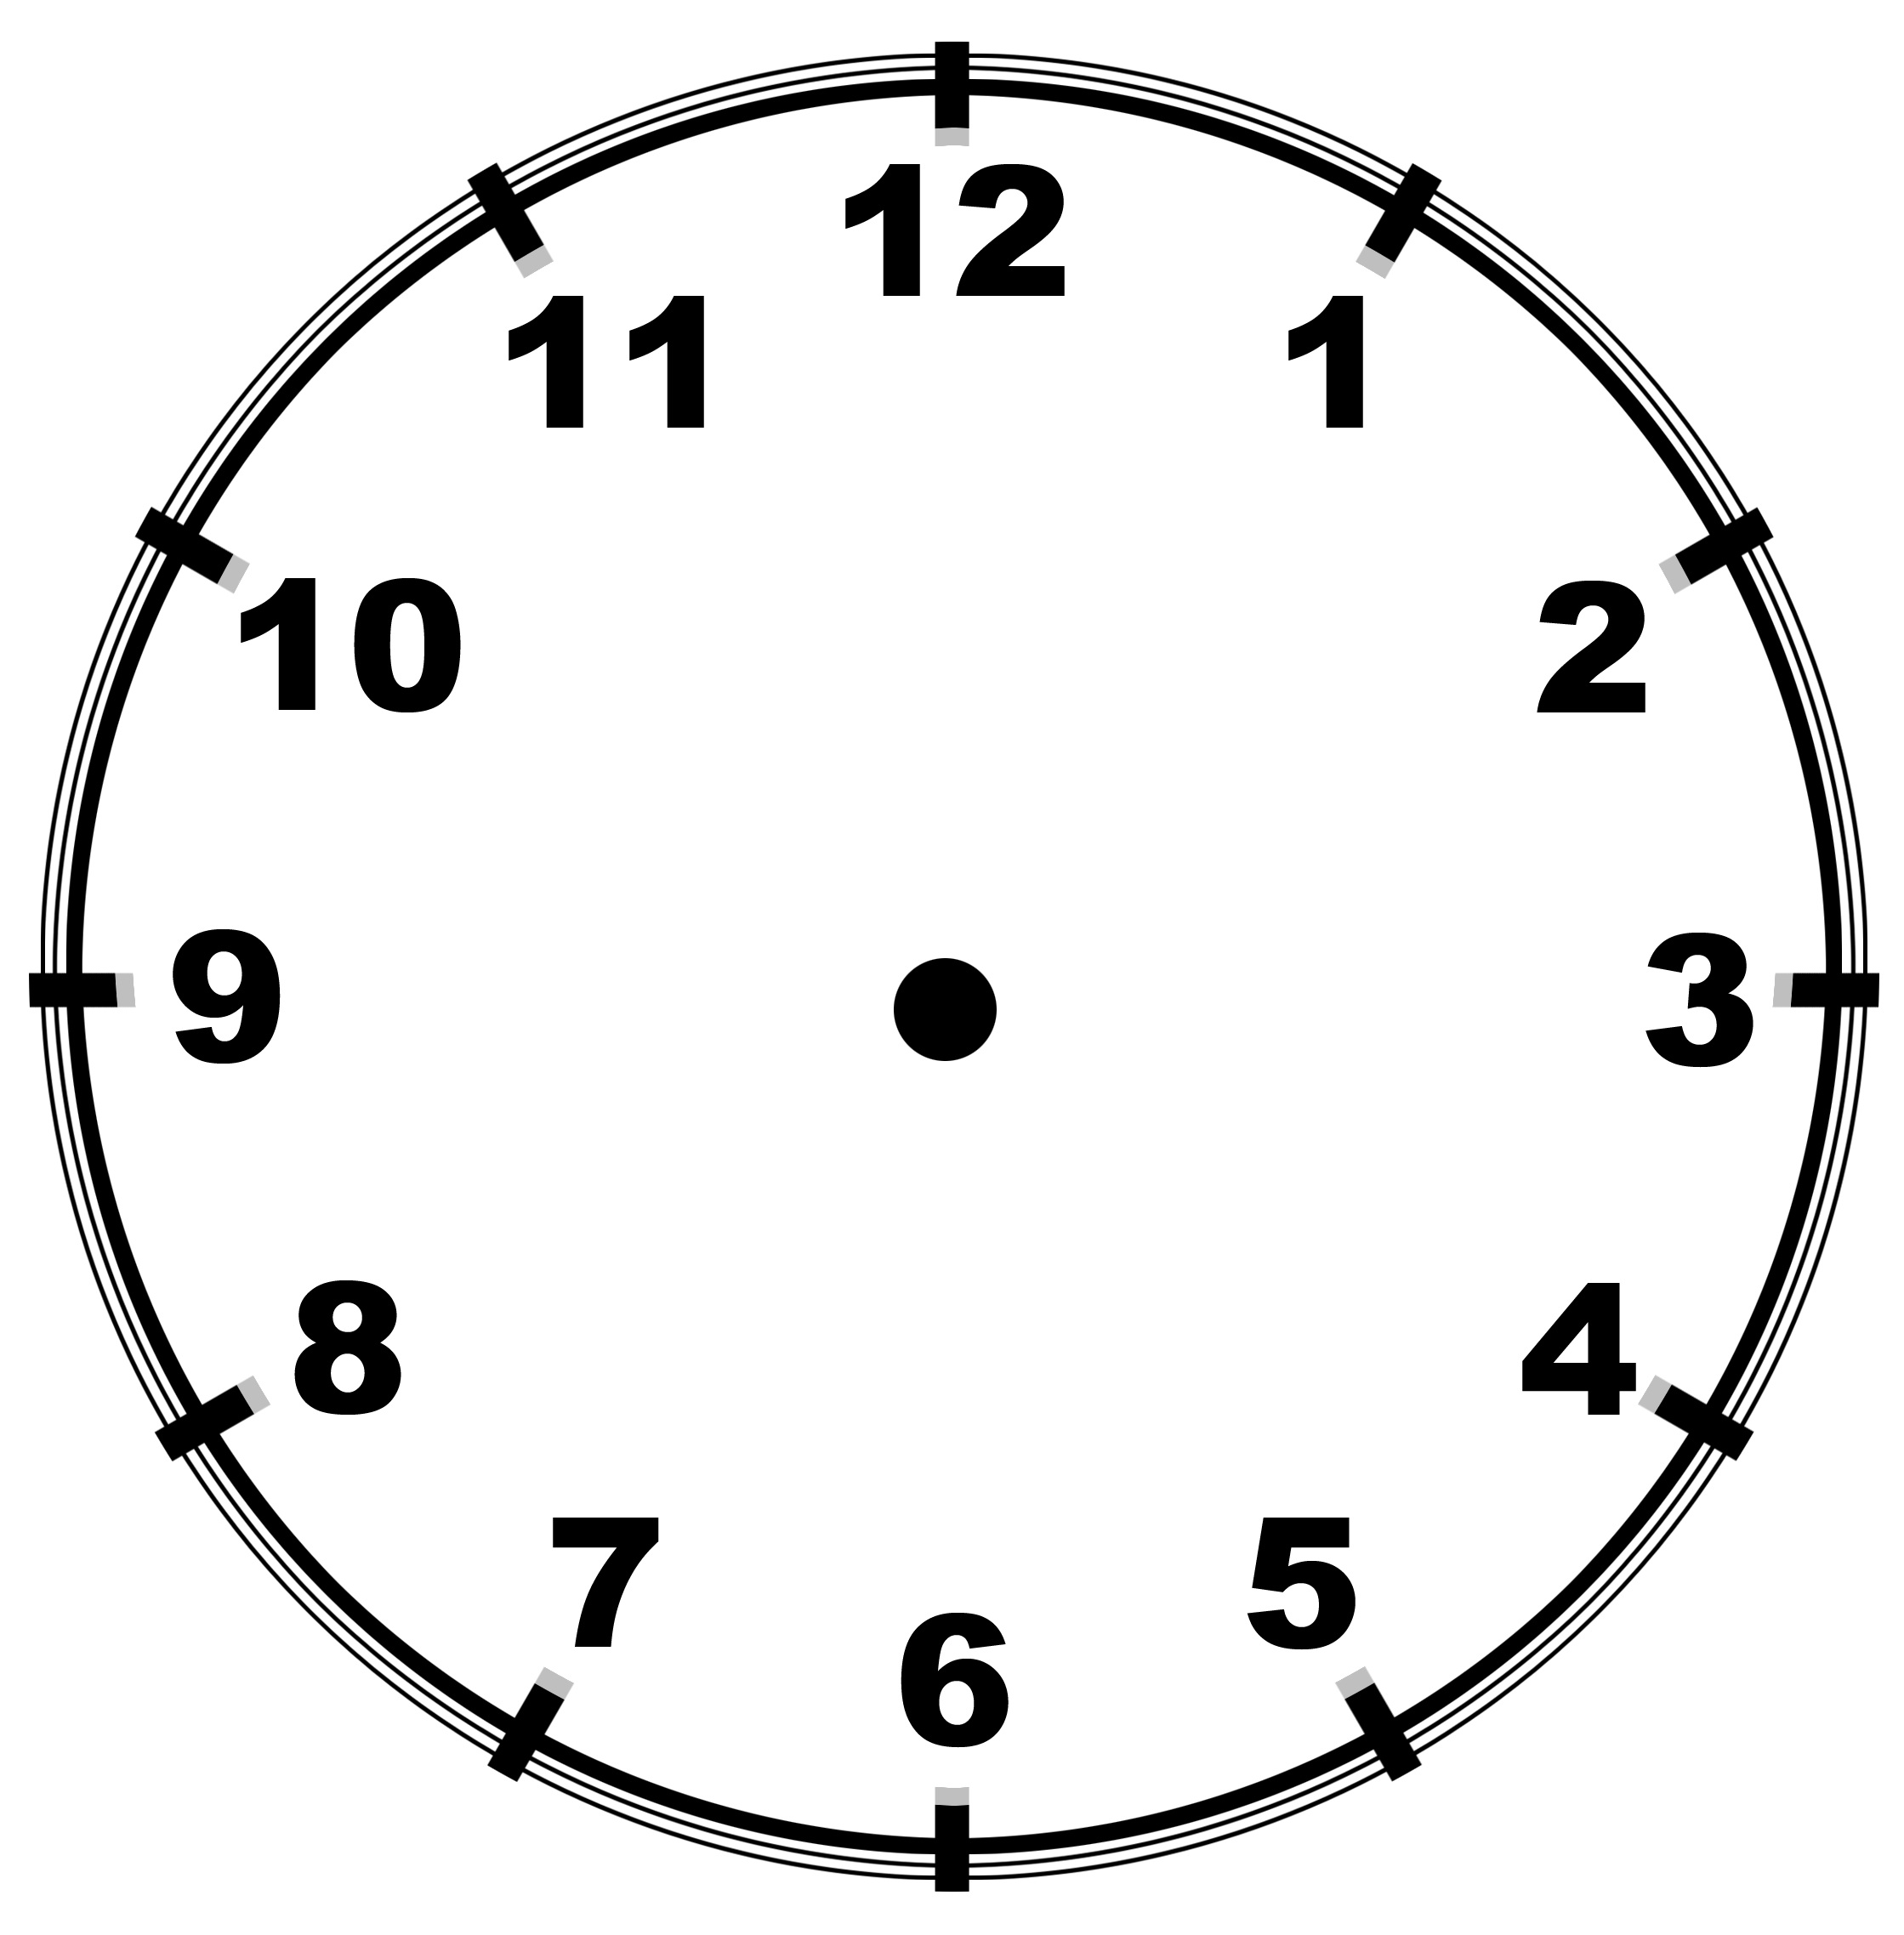 Pictures of Clocks For Teaching Time images